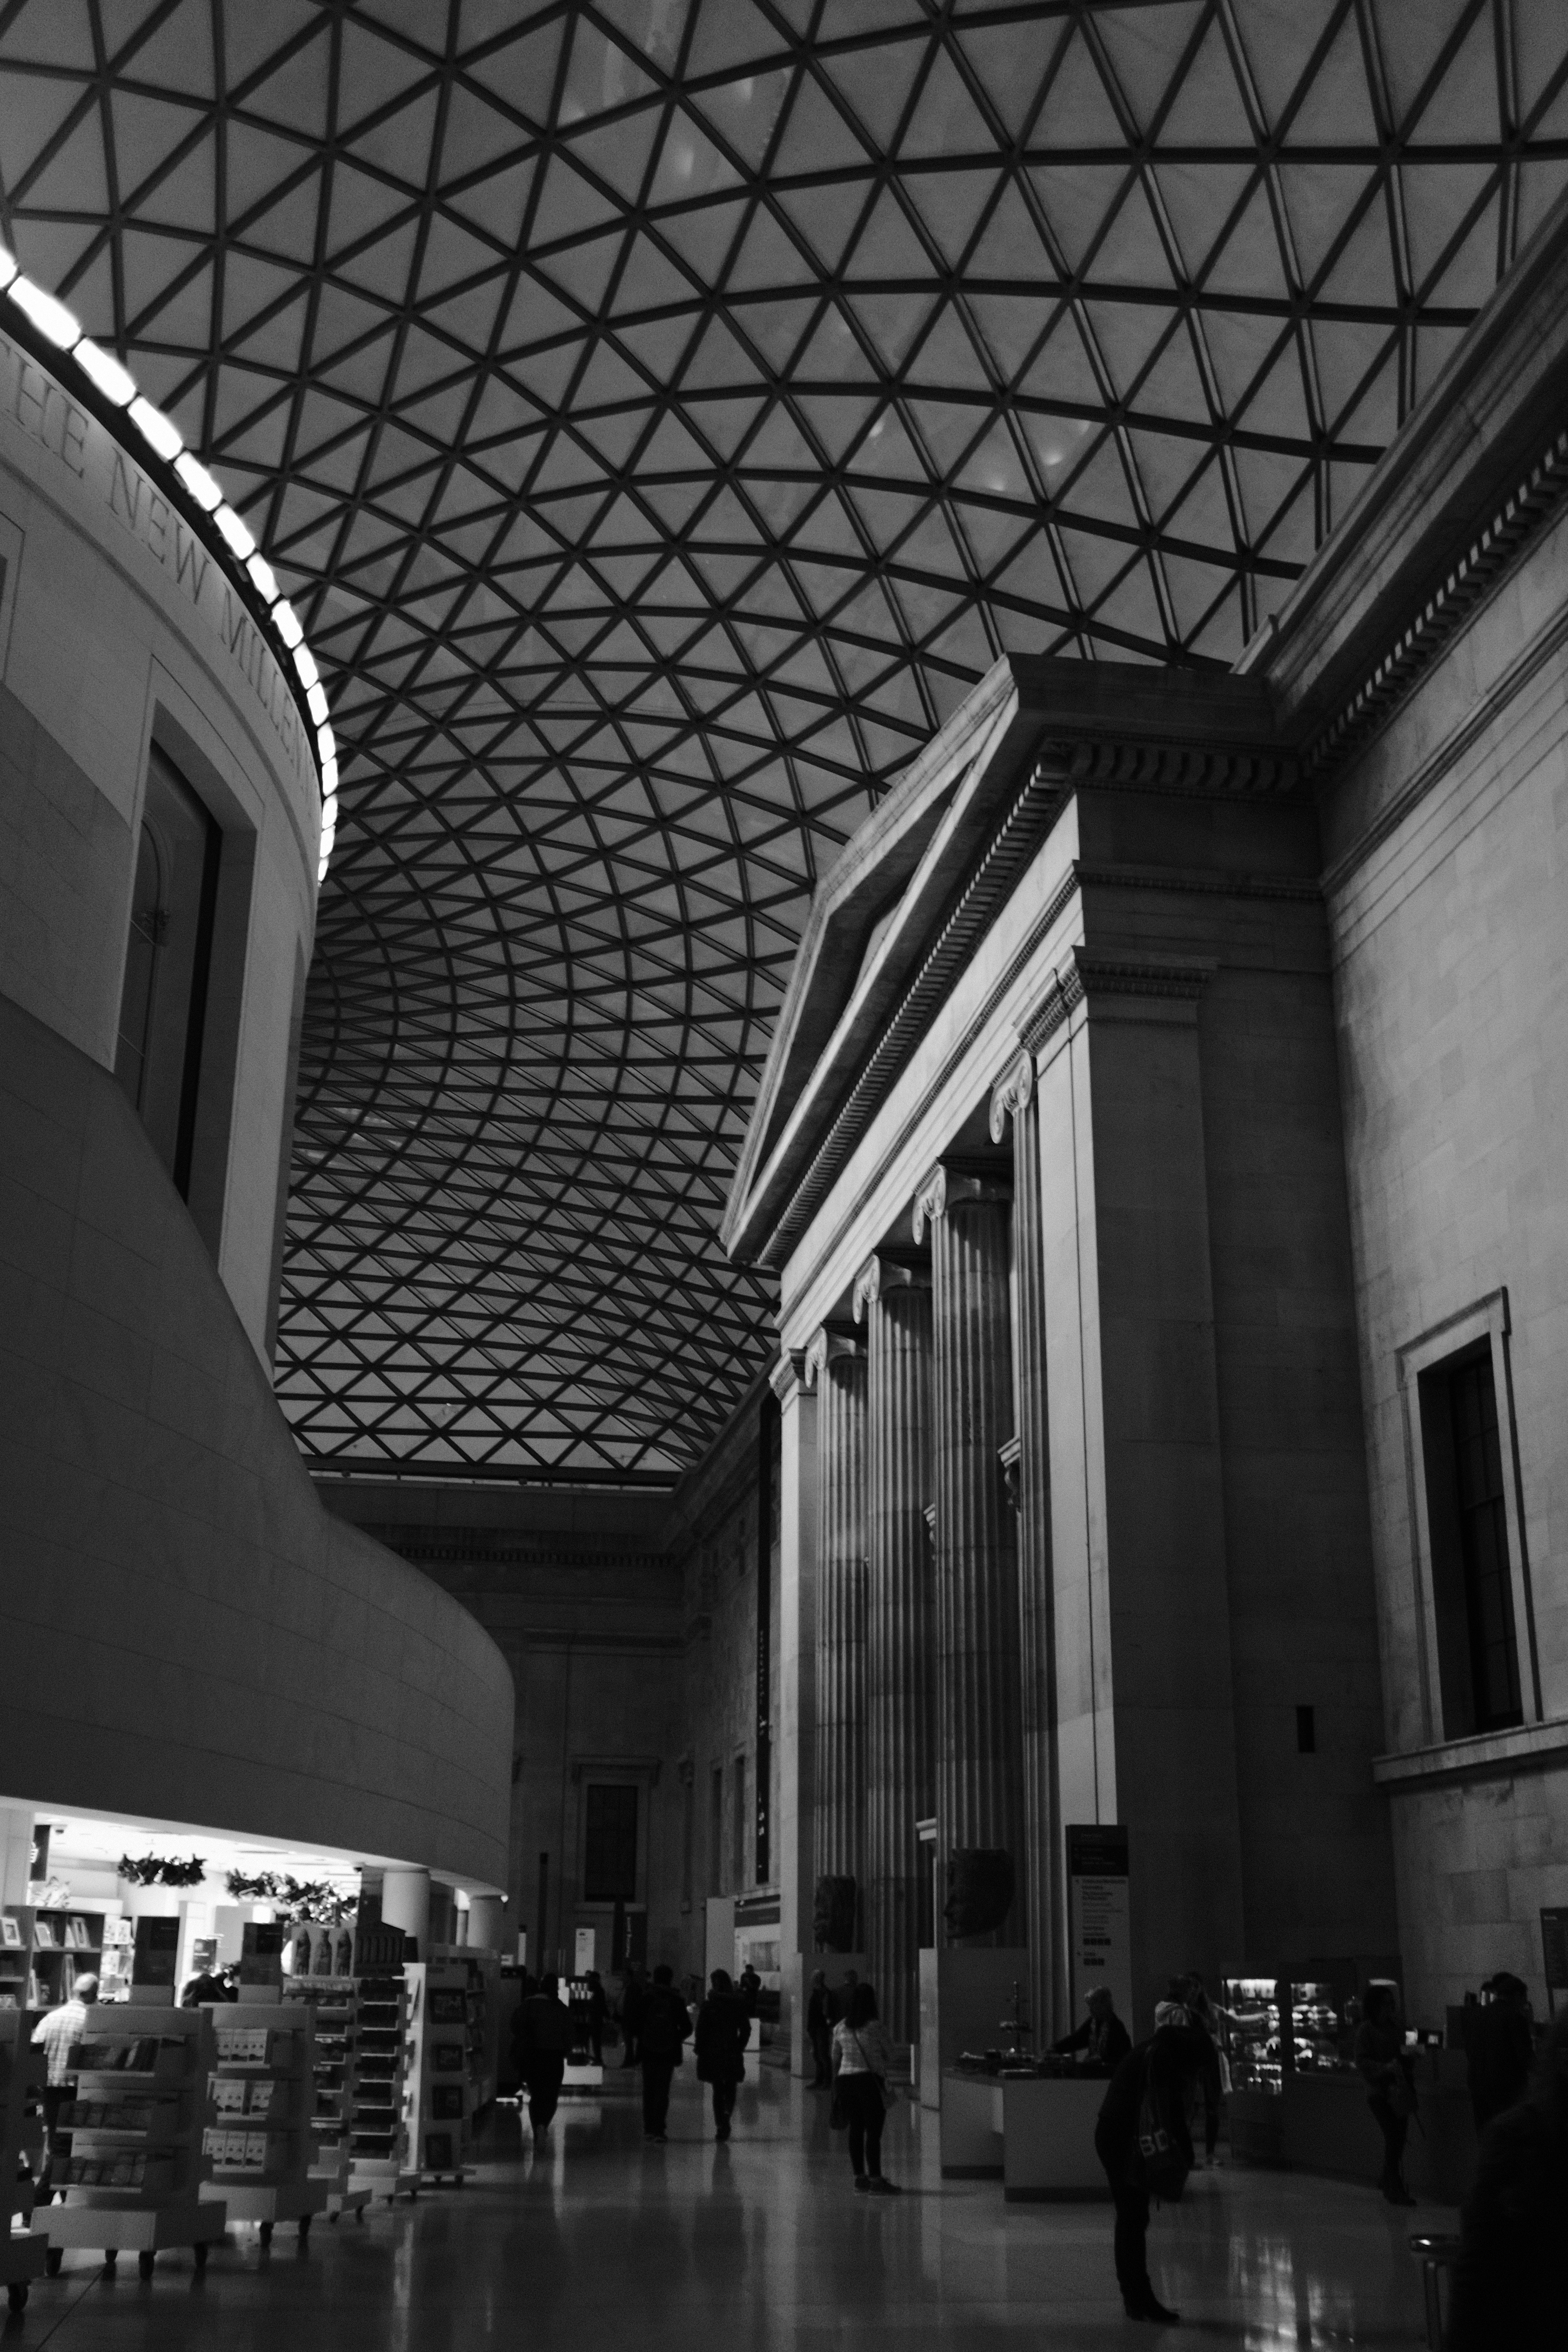 Interior of British Museum, London. Giant Greek or Roman temple facade with pillars. Black and white photography, Fujifilm Acros.